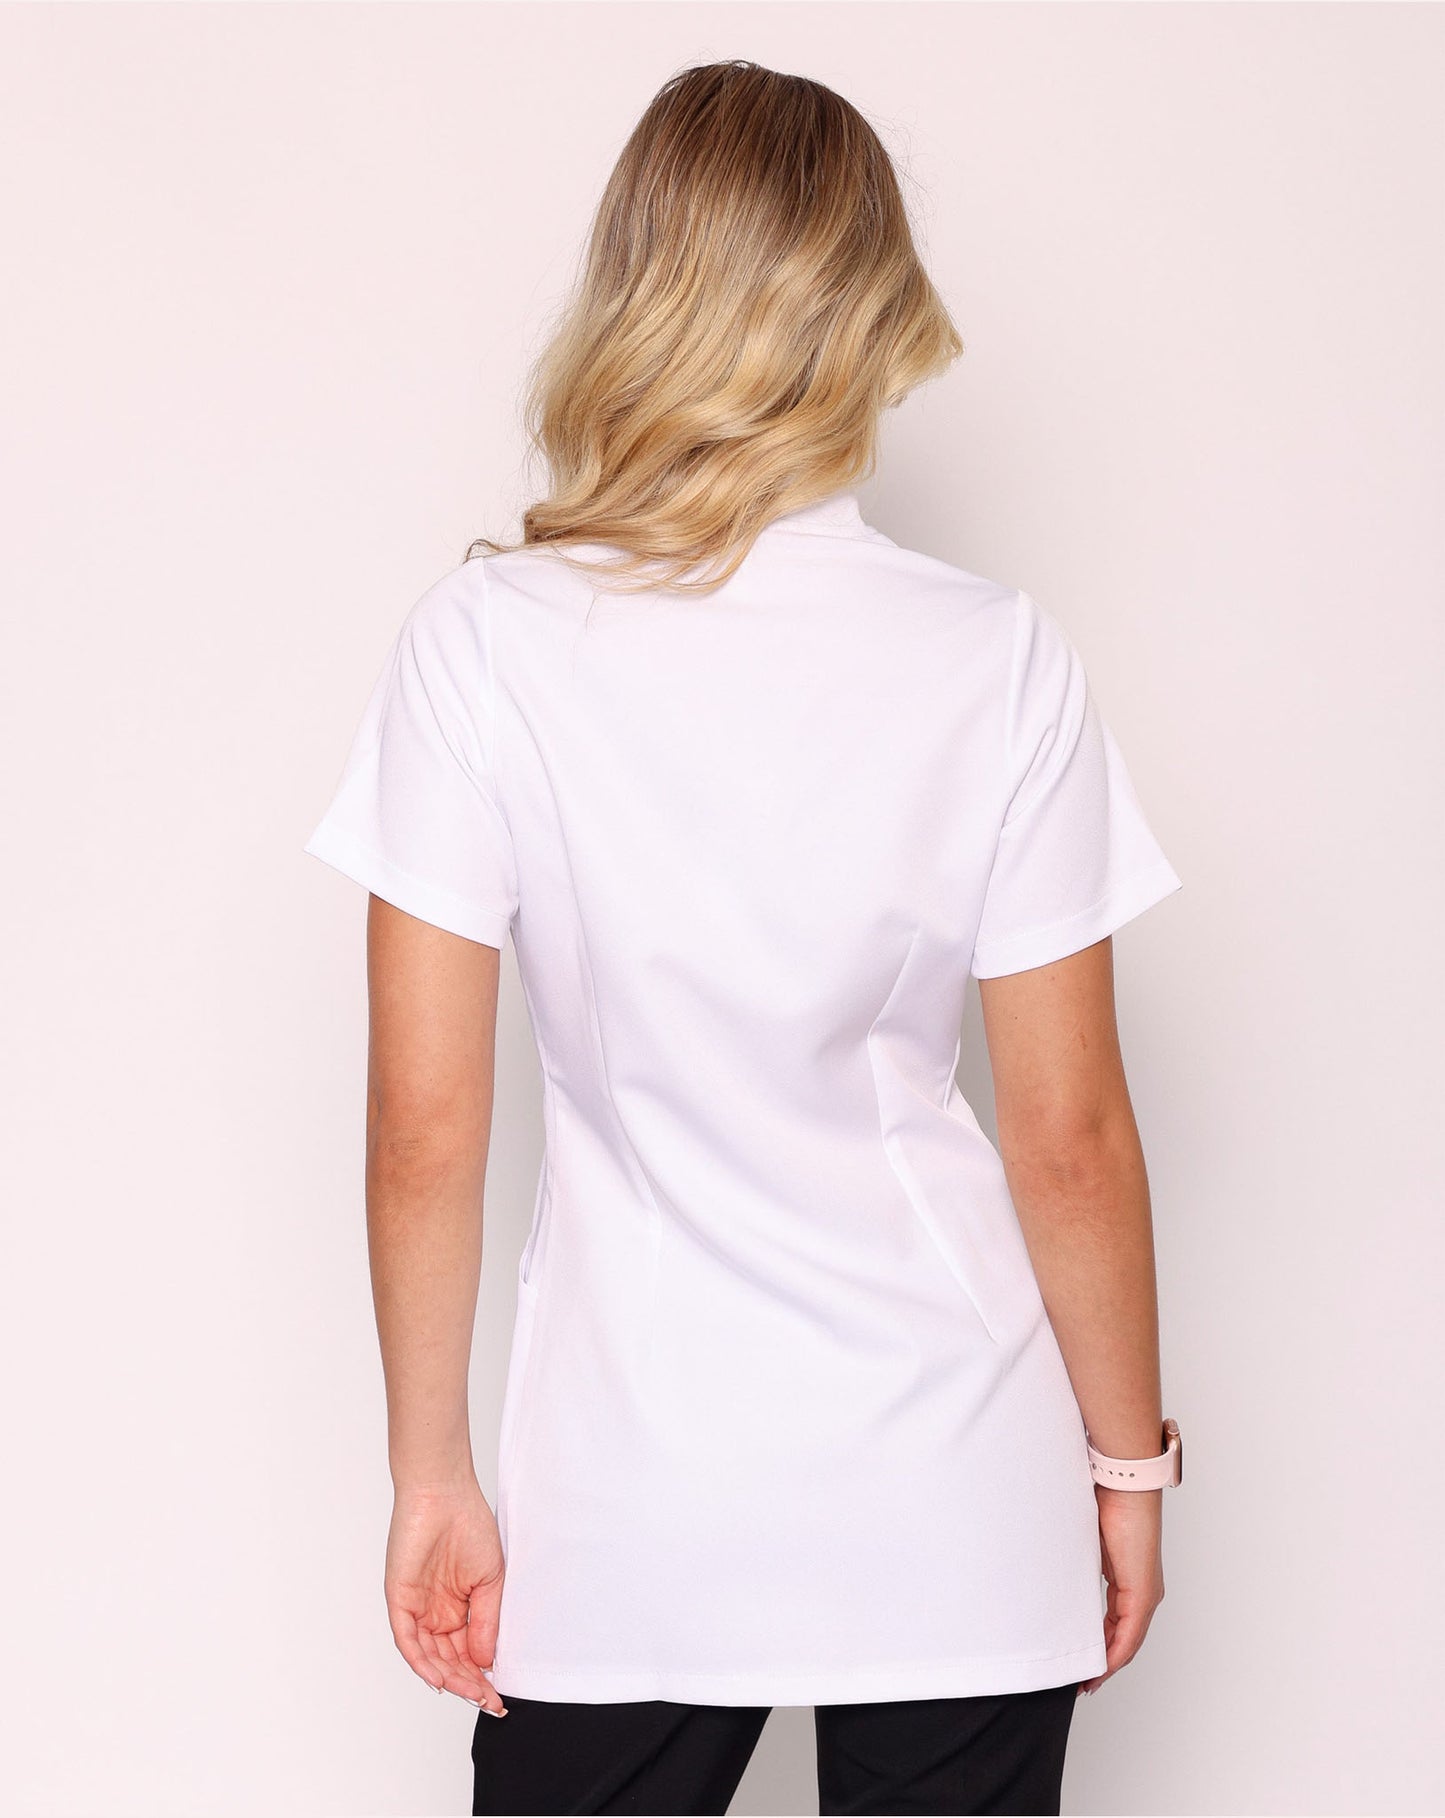 Allure Beauty Tunic with Pockets